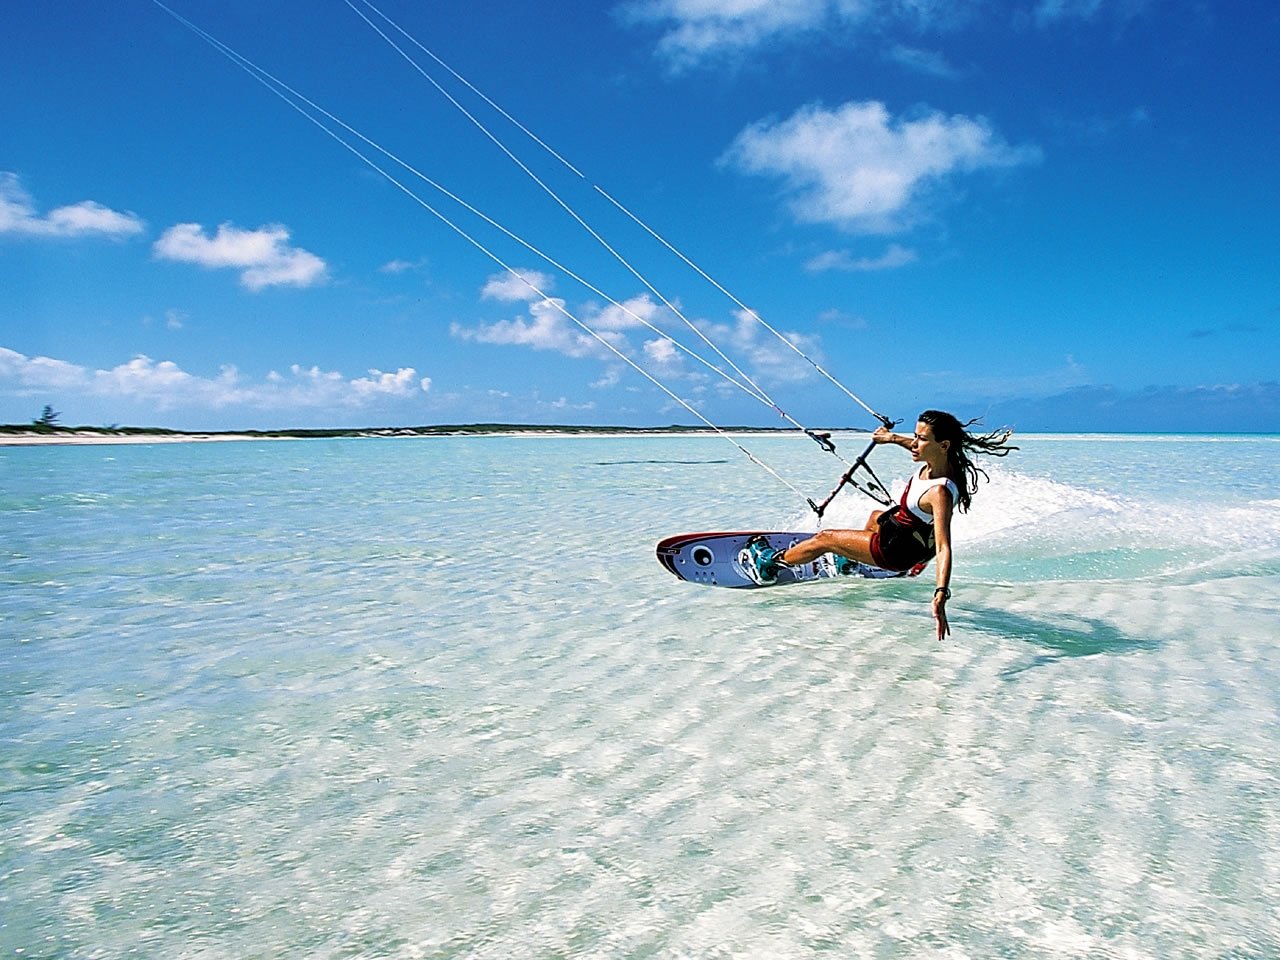 Amazing Kitesurfing Pictures & Backgrounds